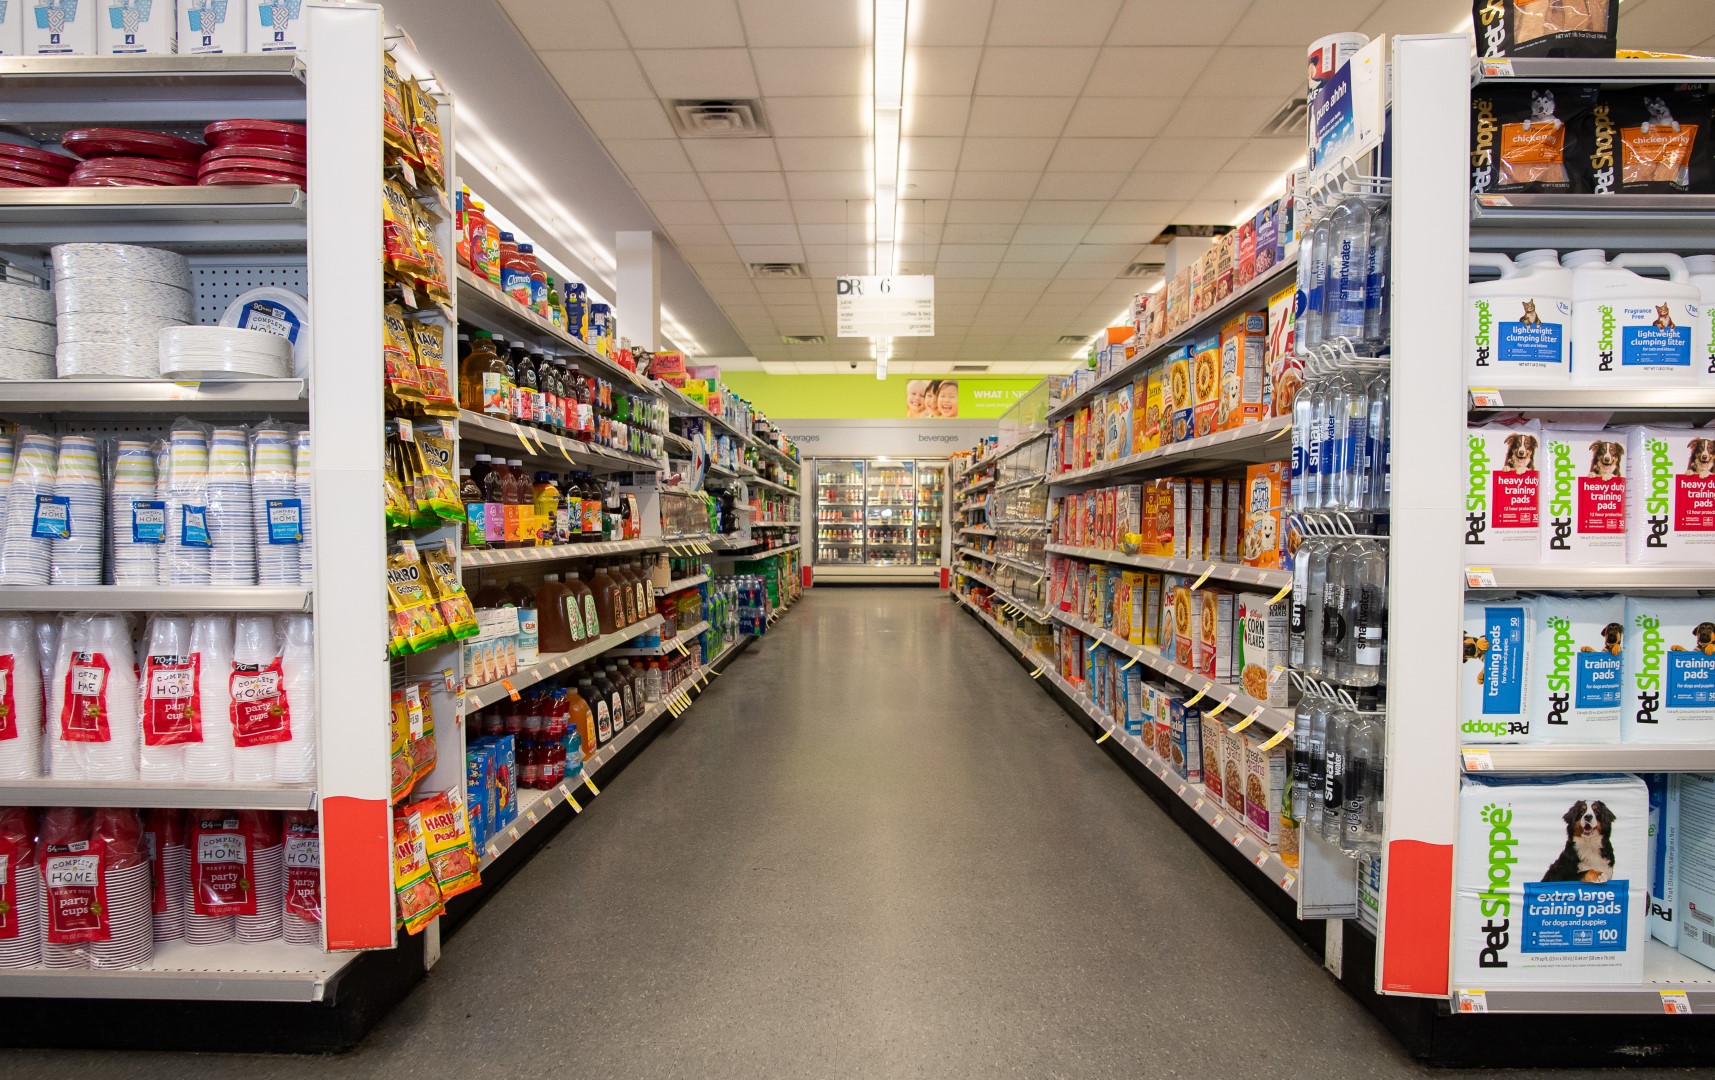 Interior of a supermarket showing aisles stocked with various packaged goods ranging from food items to household supplies, with clear aisle markers visible at the top.